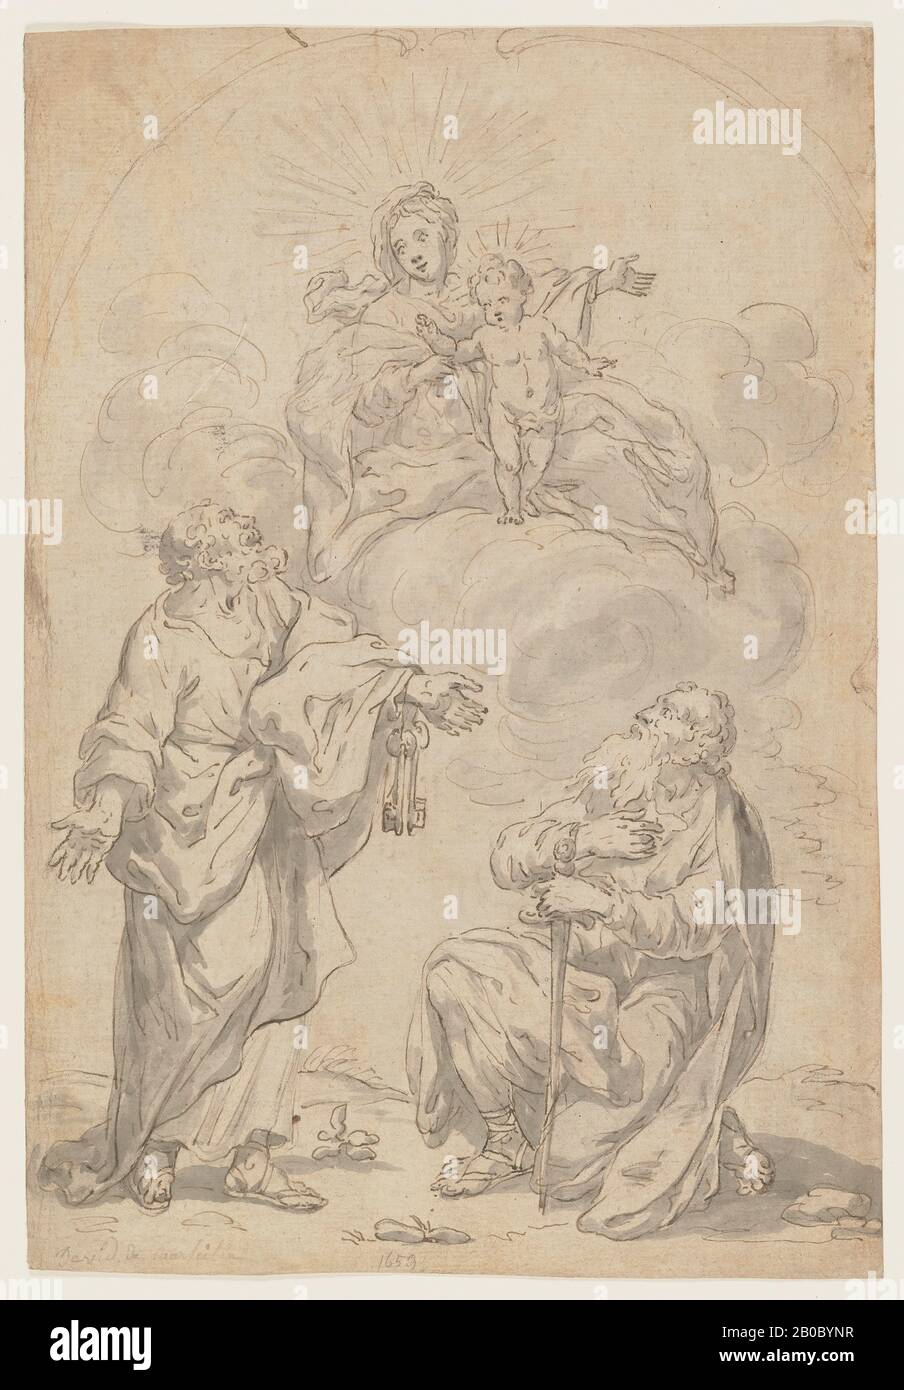 Joseph Antoine David, called David de Marseilles, The Virgin and Child Appearing to Saints Peter and Paul, 1659, pen and black and brown ink, grey wash, over black chalk on paper, 12 11/16 in. x 8 5/8 in. (32.23 cm. x 21.91 cm.) Stock Photo